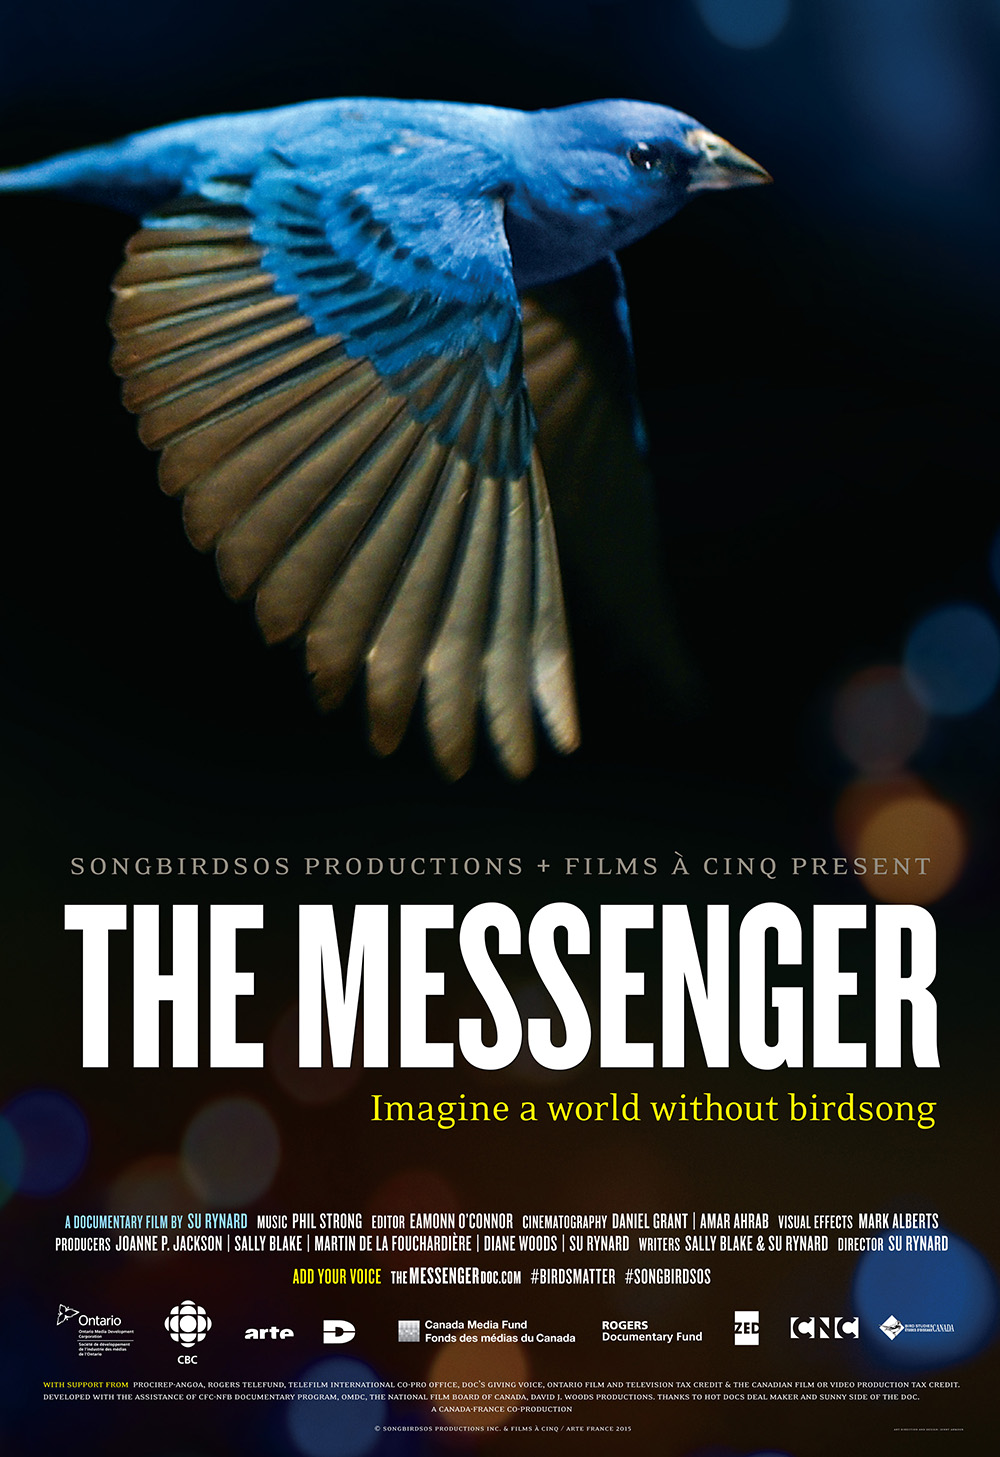 the messengers poster